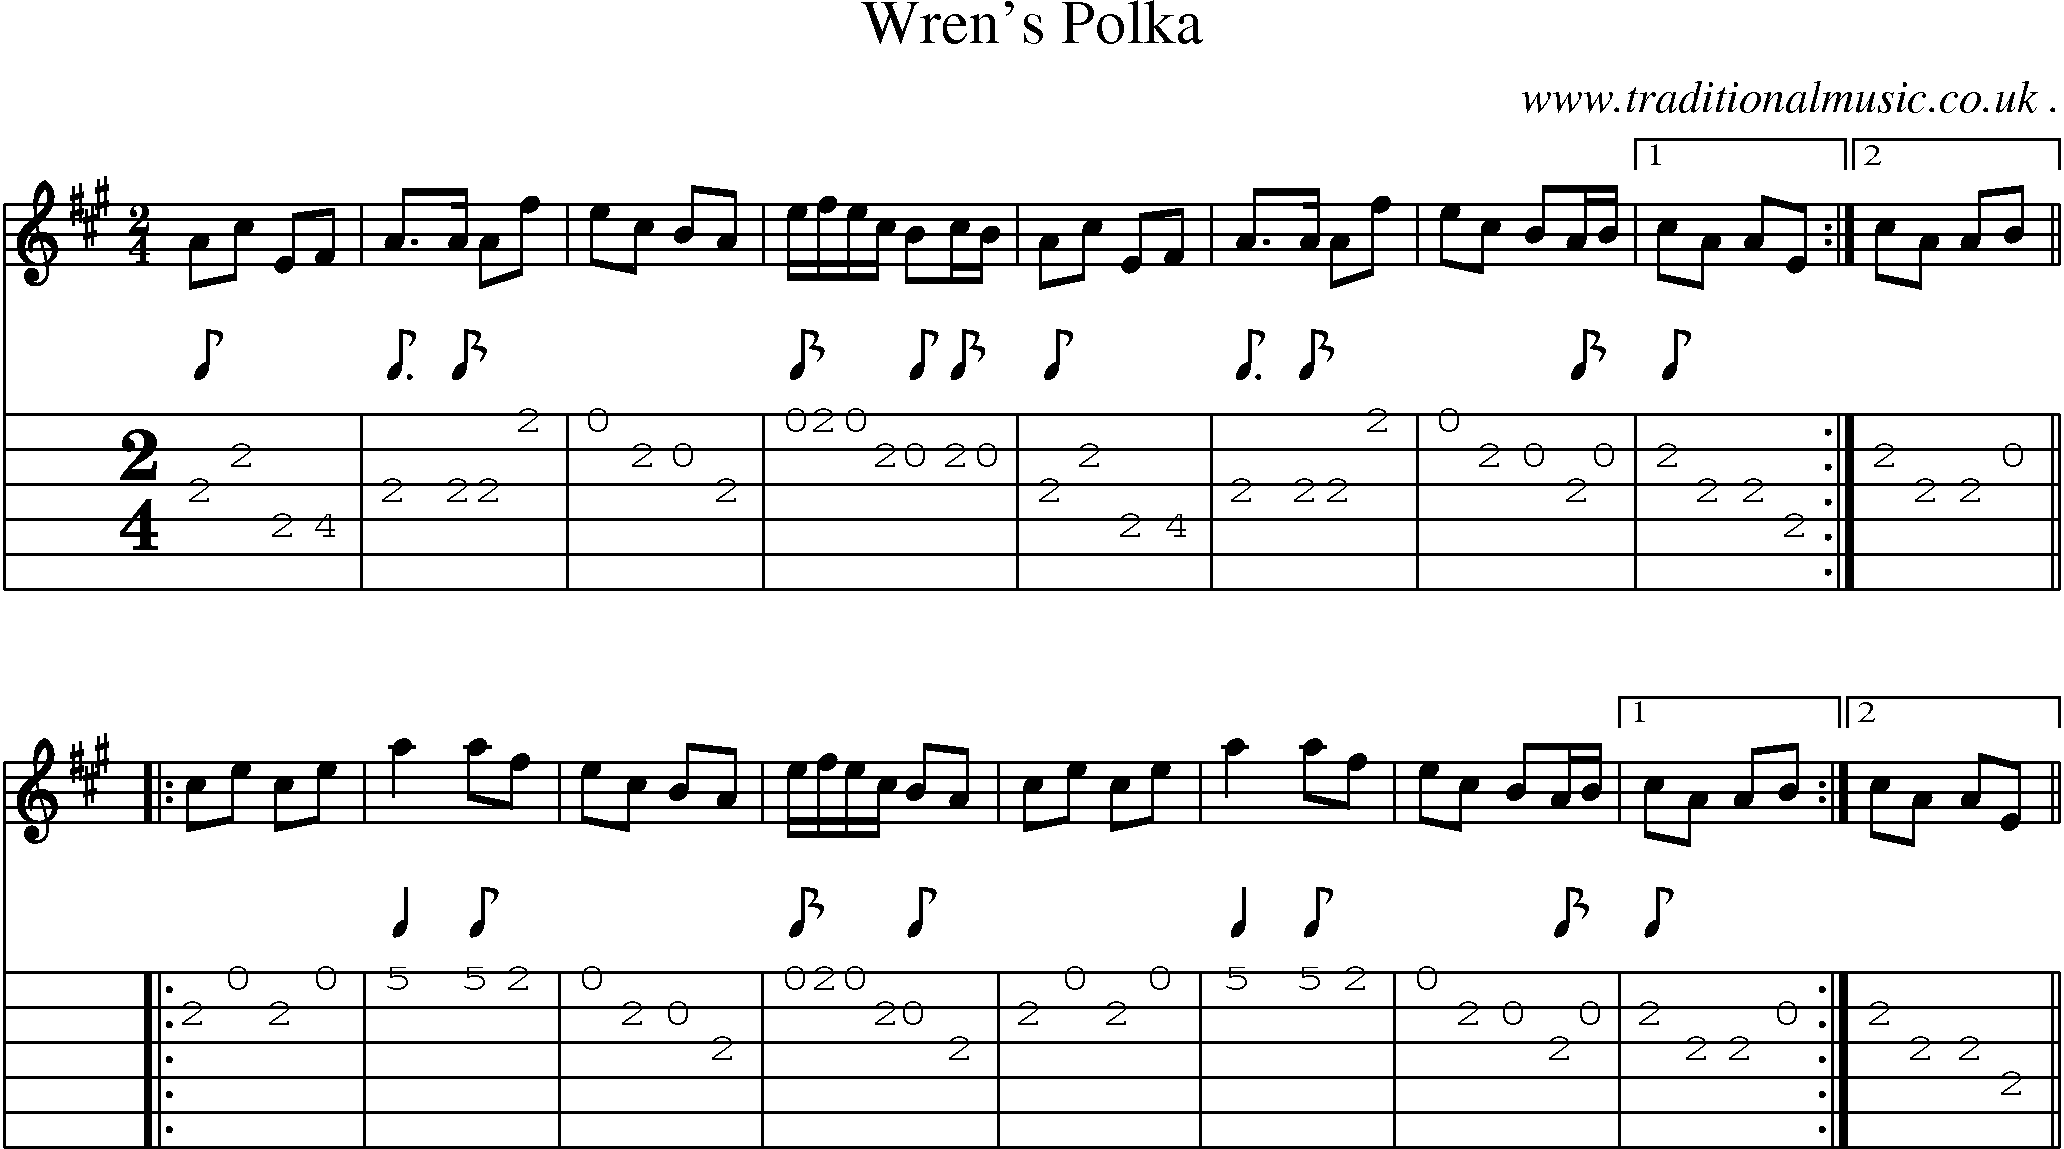 Sheet-Music and Guitar Tabs for Wrens Polka